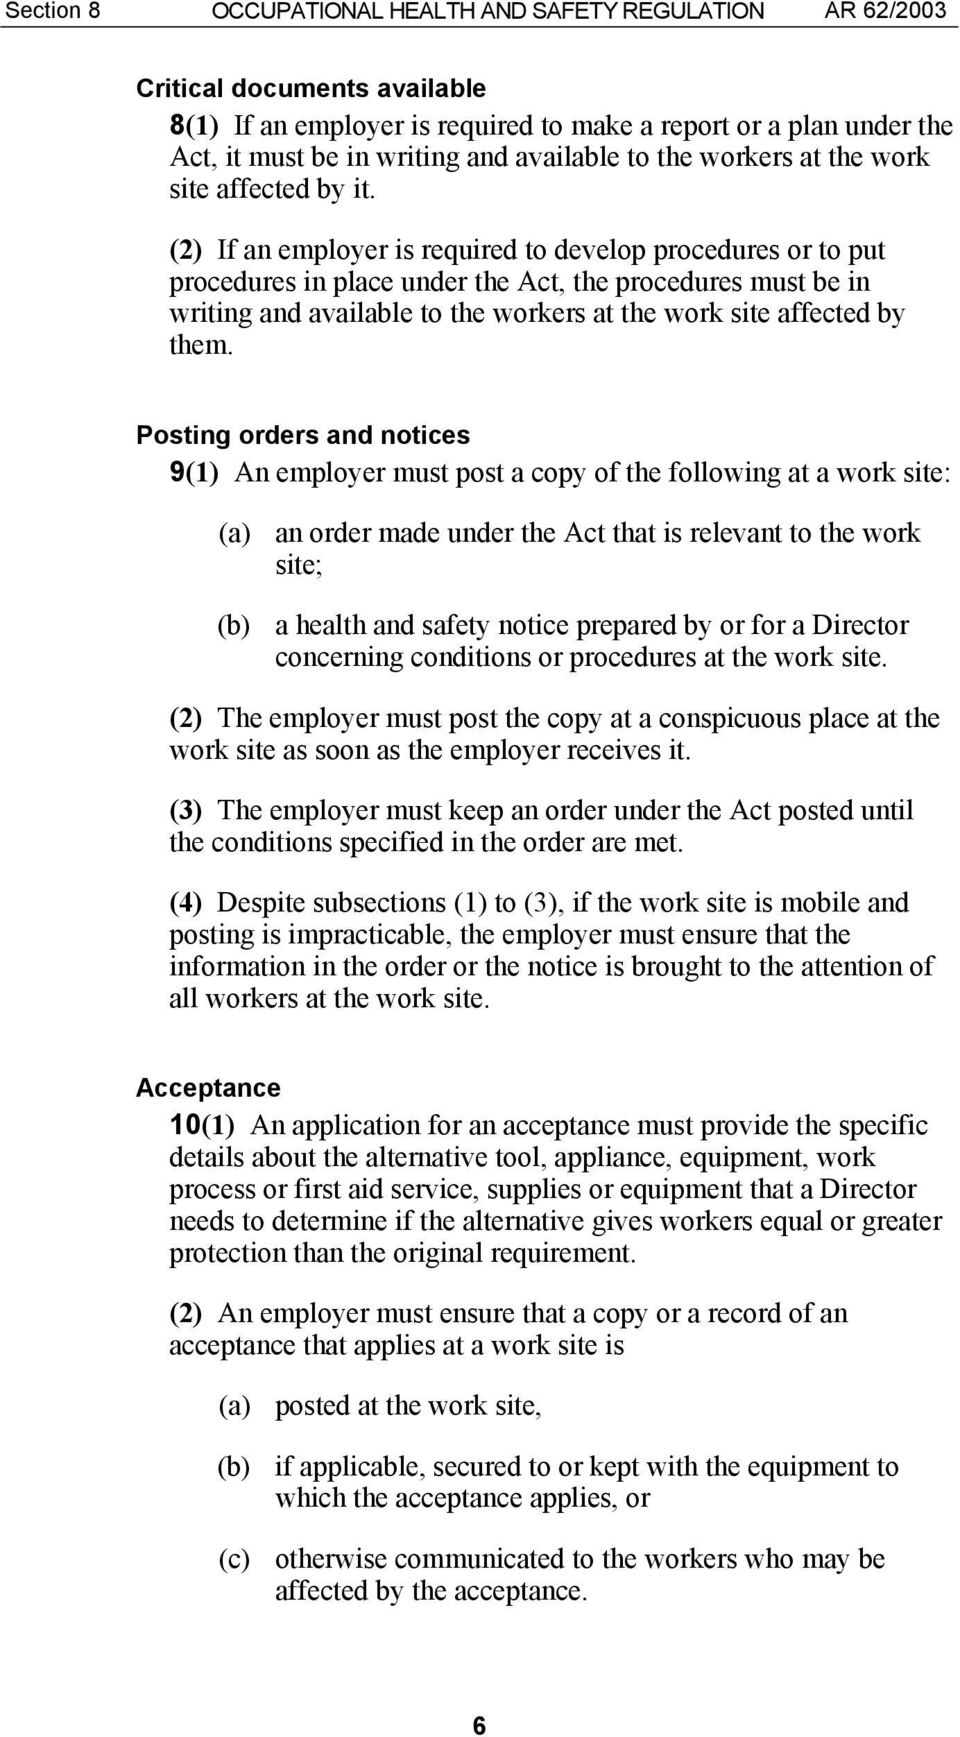 (2) If an employer is required to develop procedures or to put procedures in place under the Act, the procedures must be in writing and available to the workers at the work site affected by them.